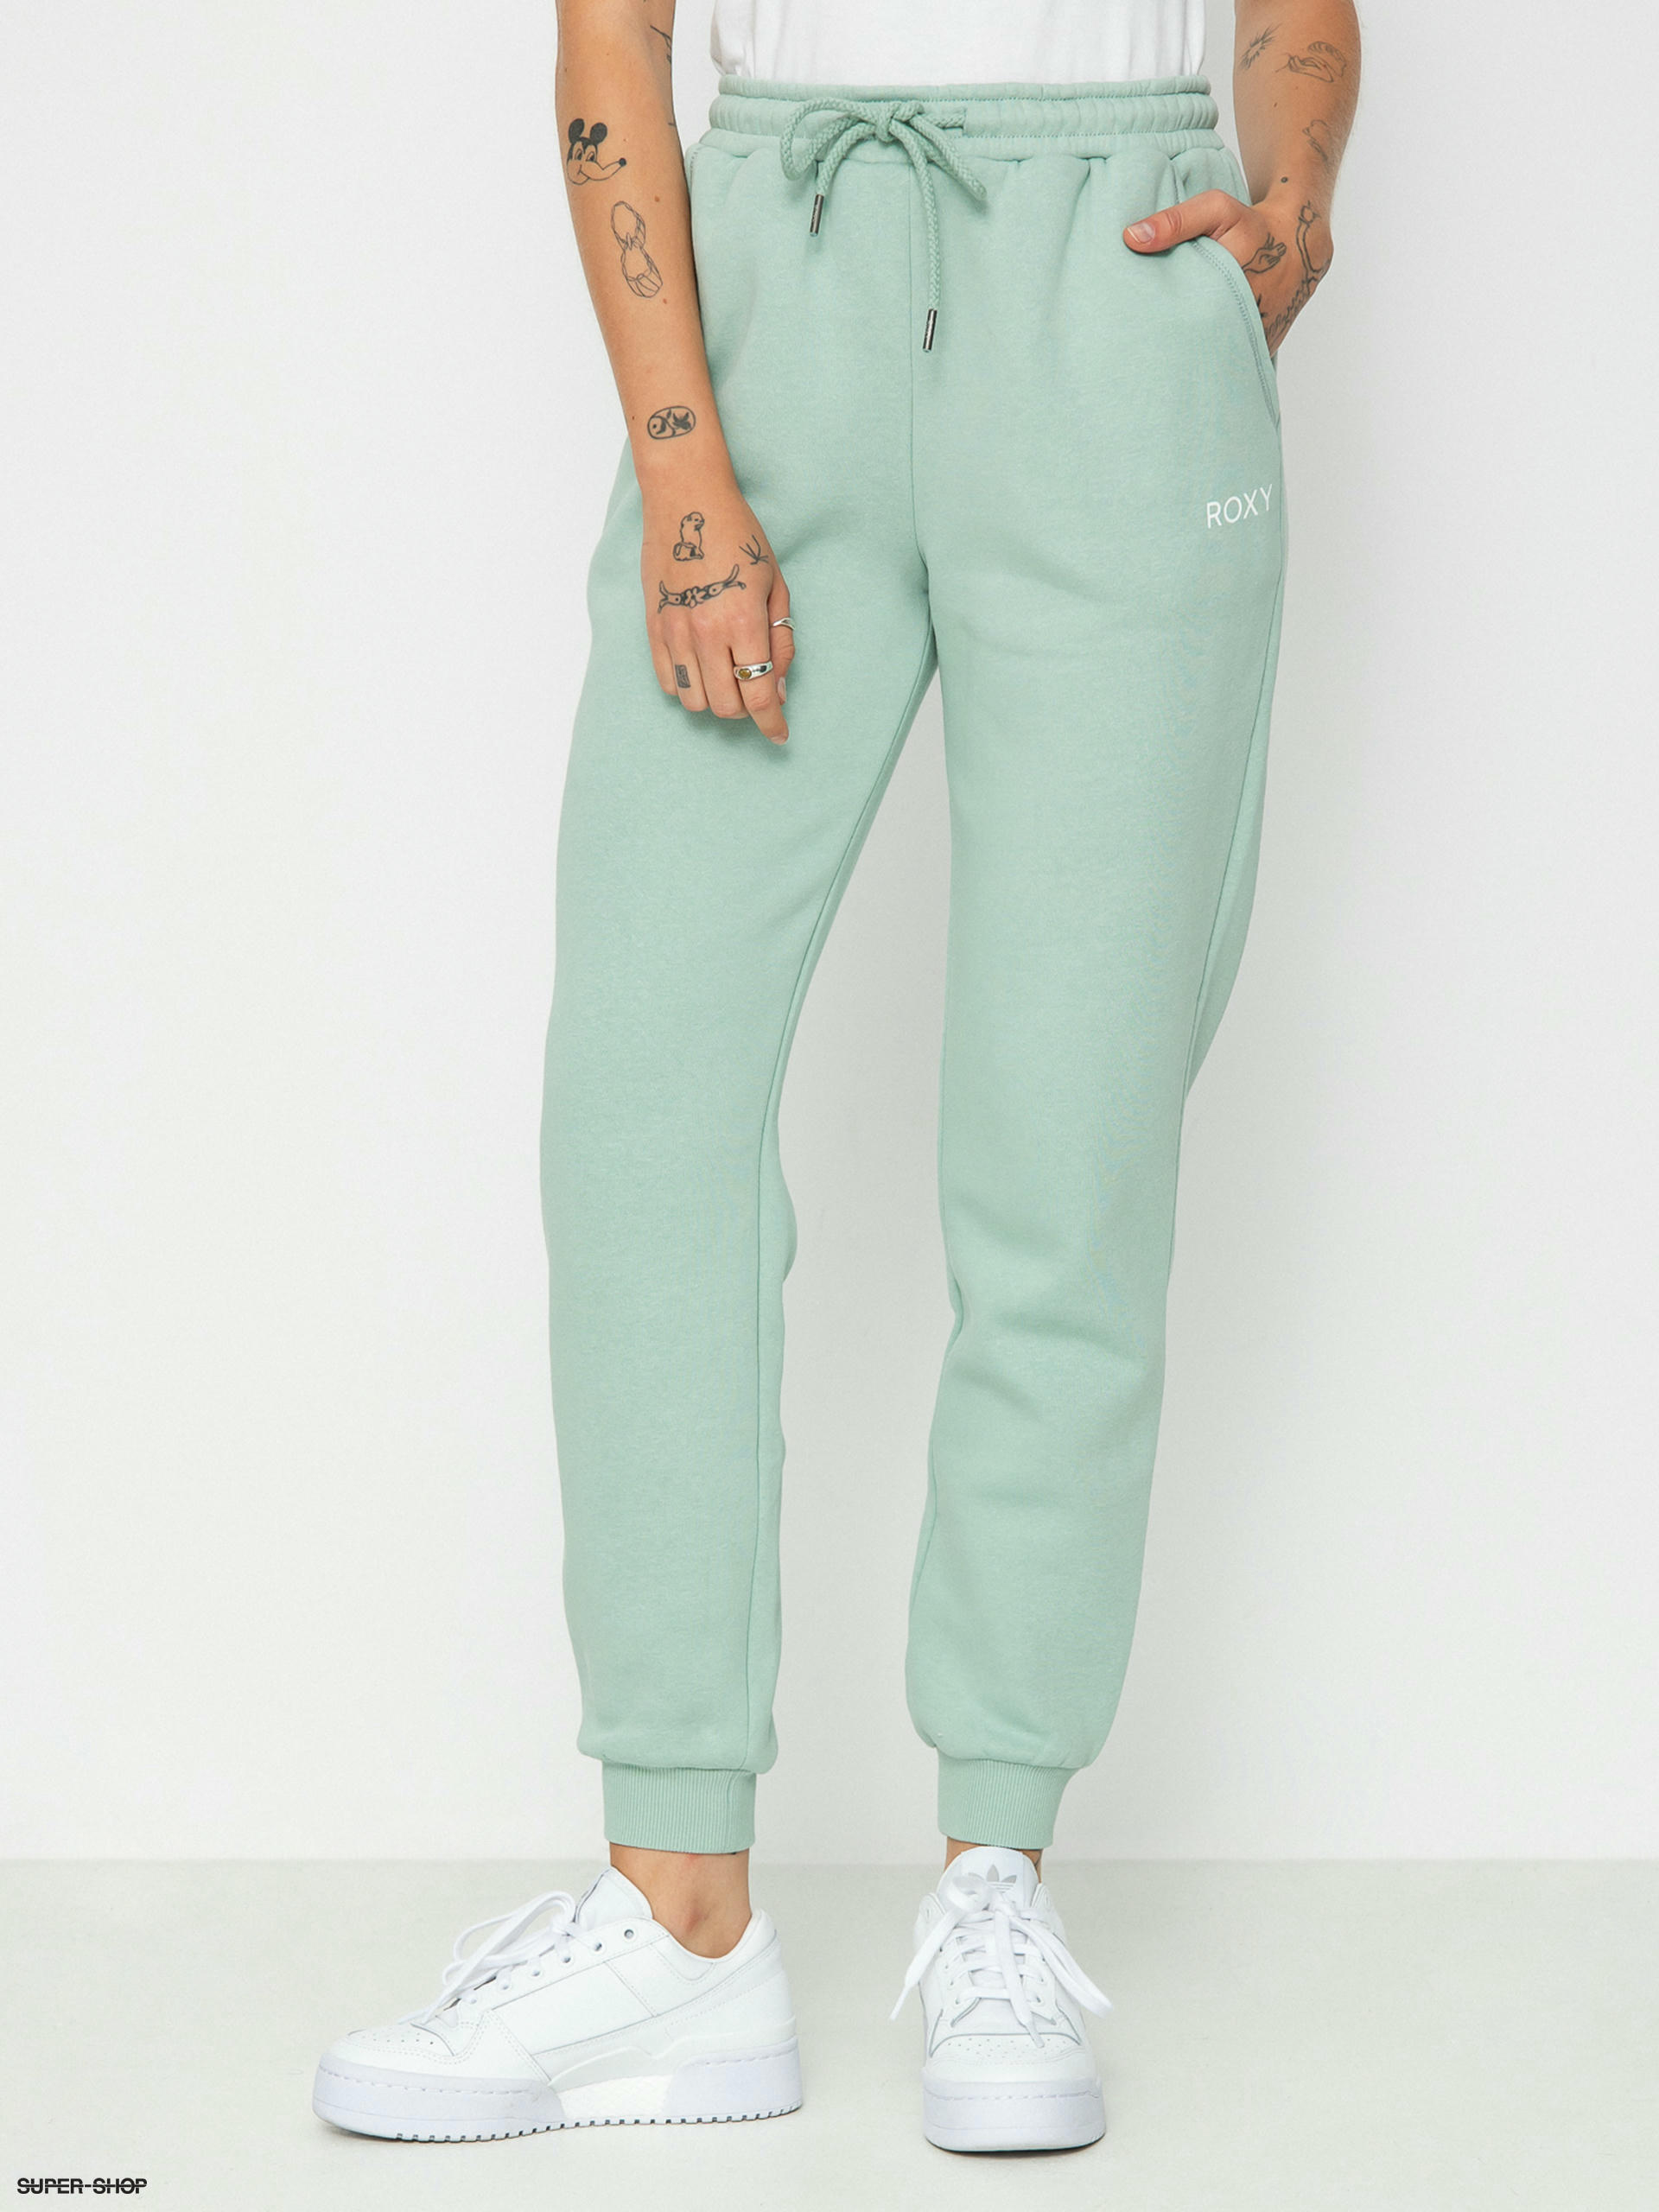 Roxy From Home Pants Wmn (blue surf)